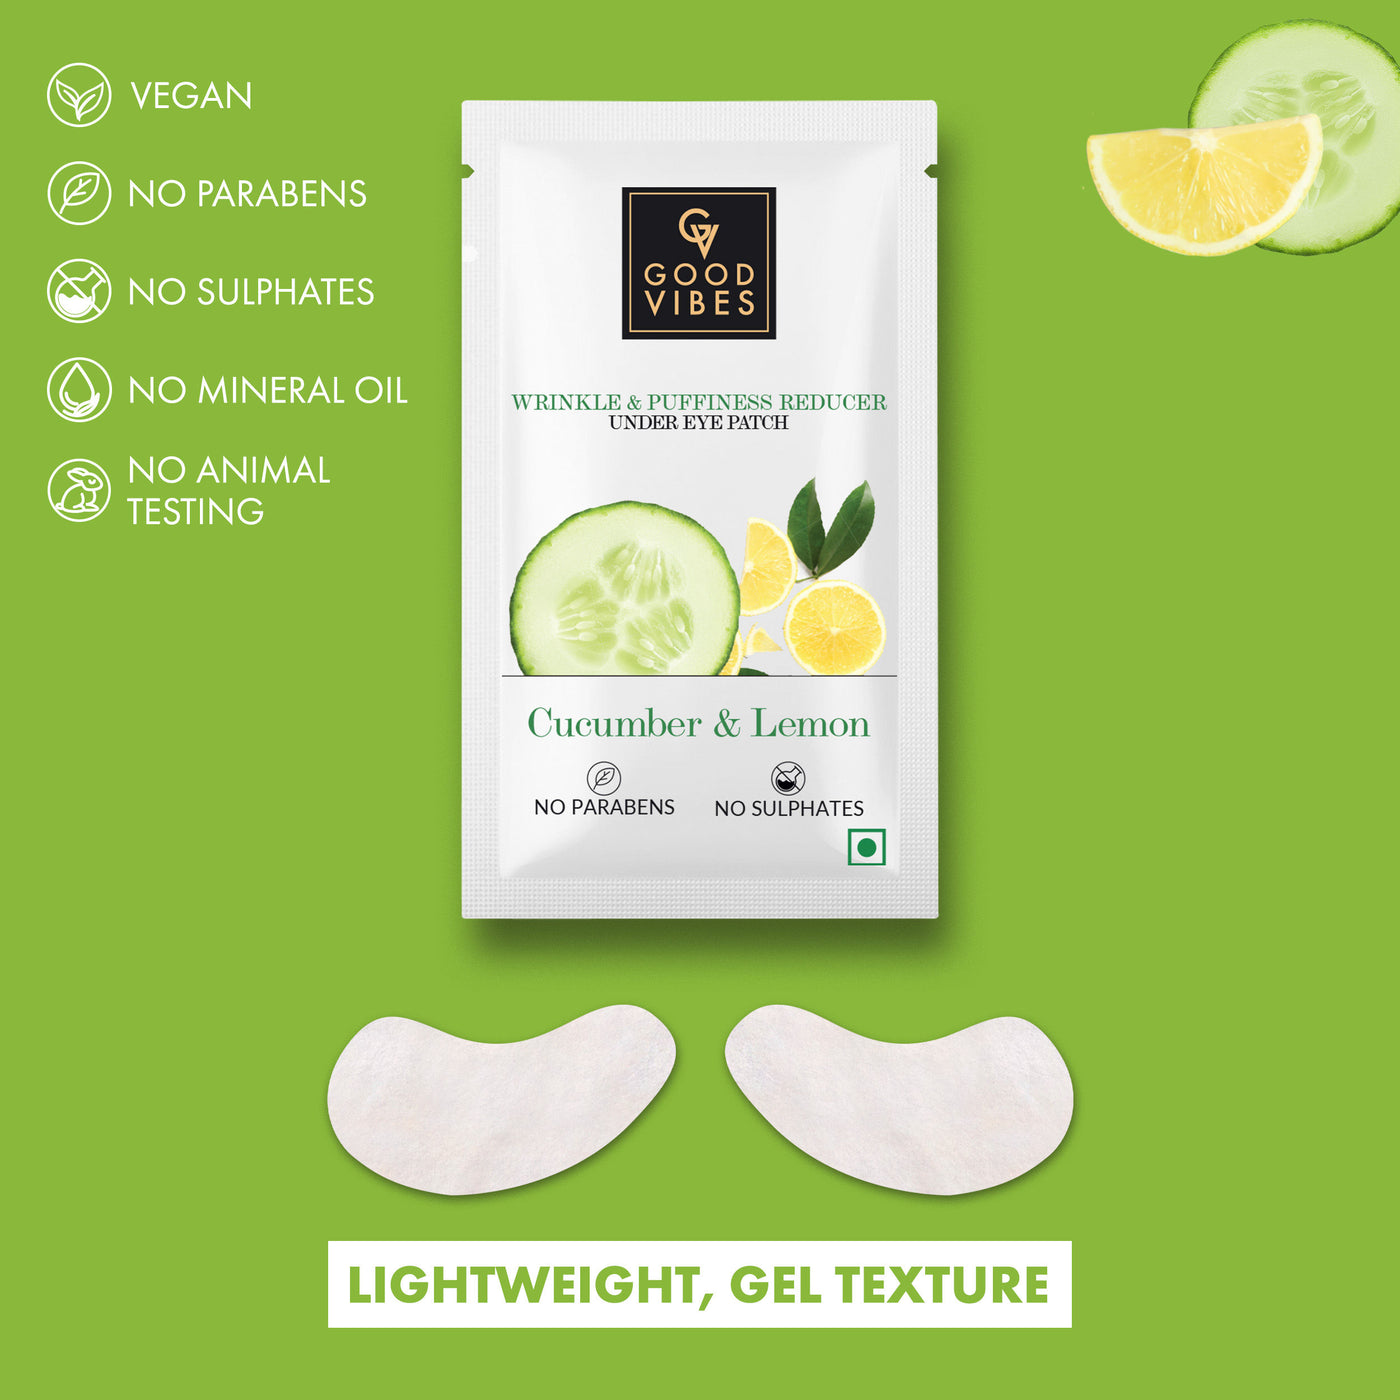 good-vibes-wrinkle-and-puffiness-reducer-under-eye-patch-cucumber-and-lemon-20-ml-4